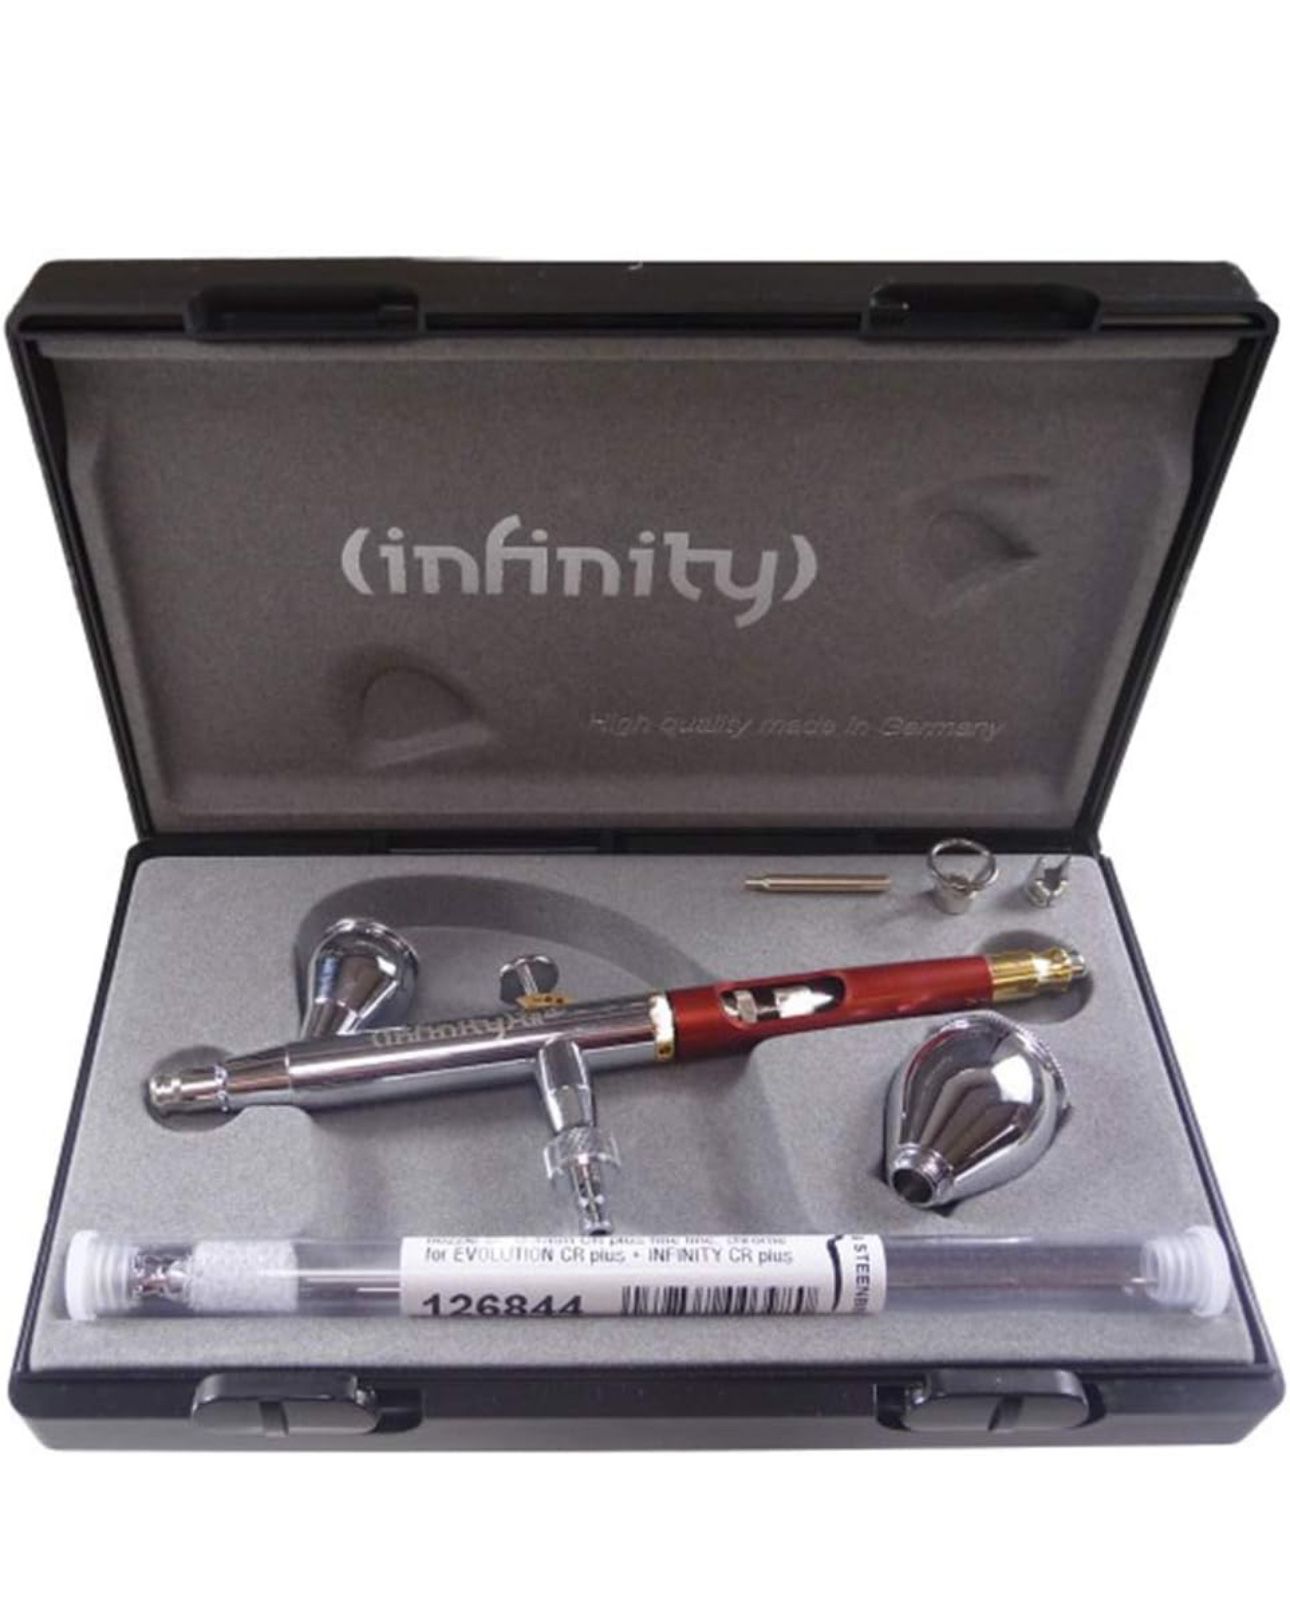 Harder & Steenbeck Infinity CR Plus 2in1 Airbrush